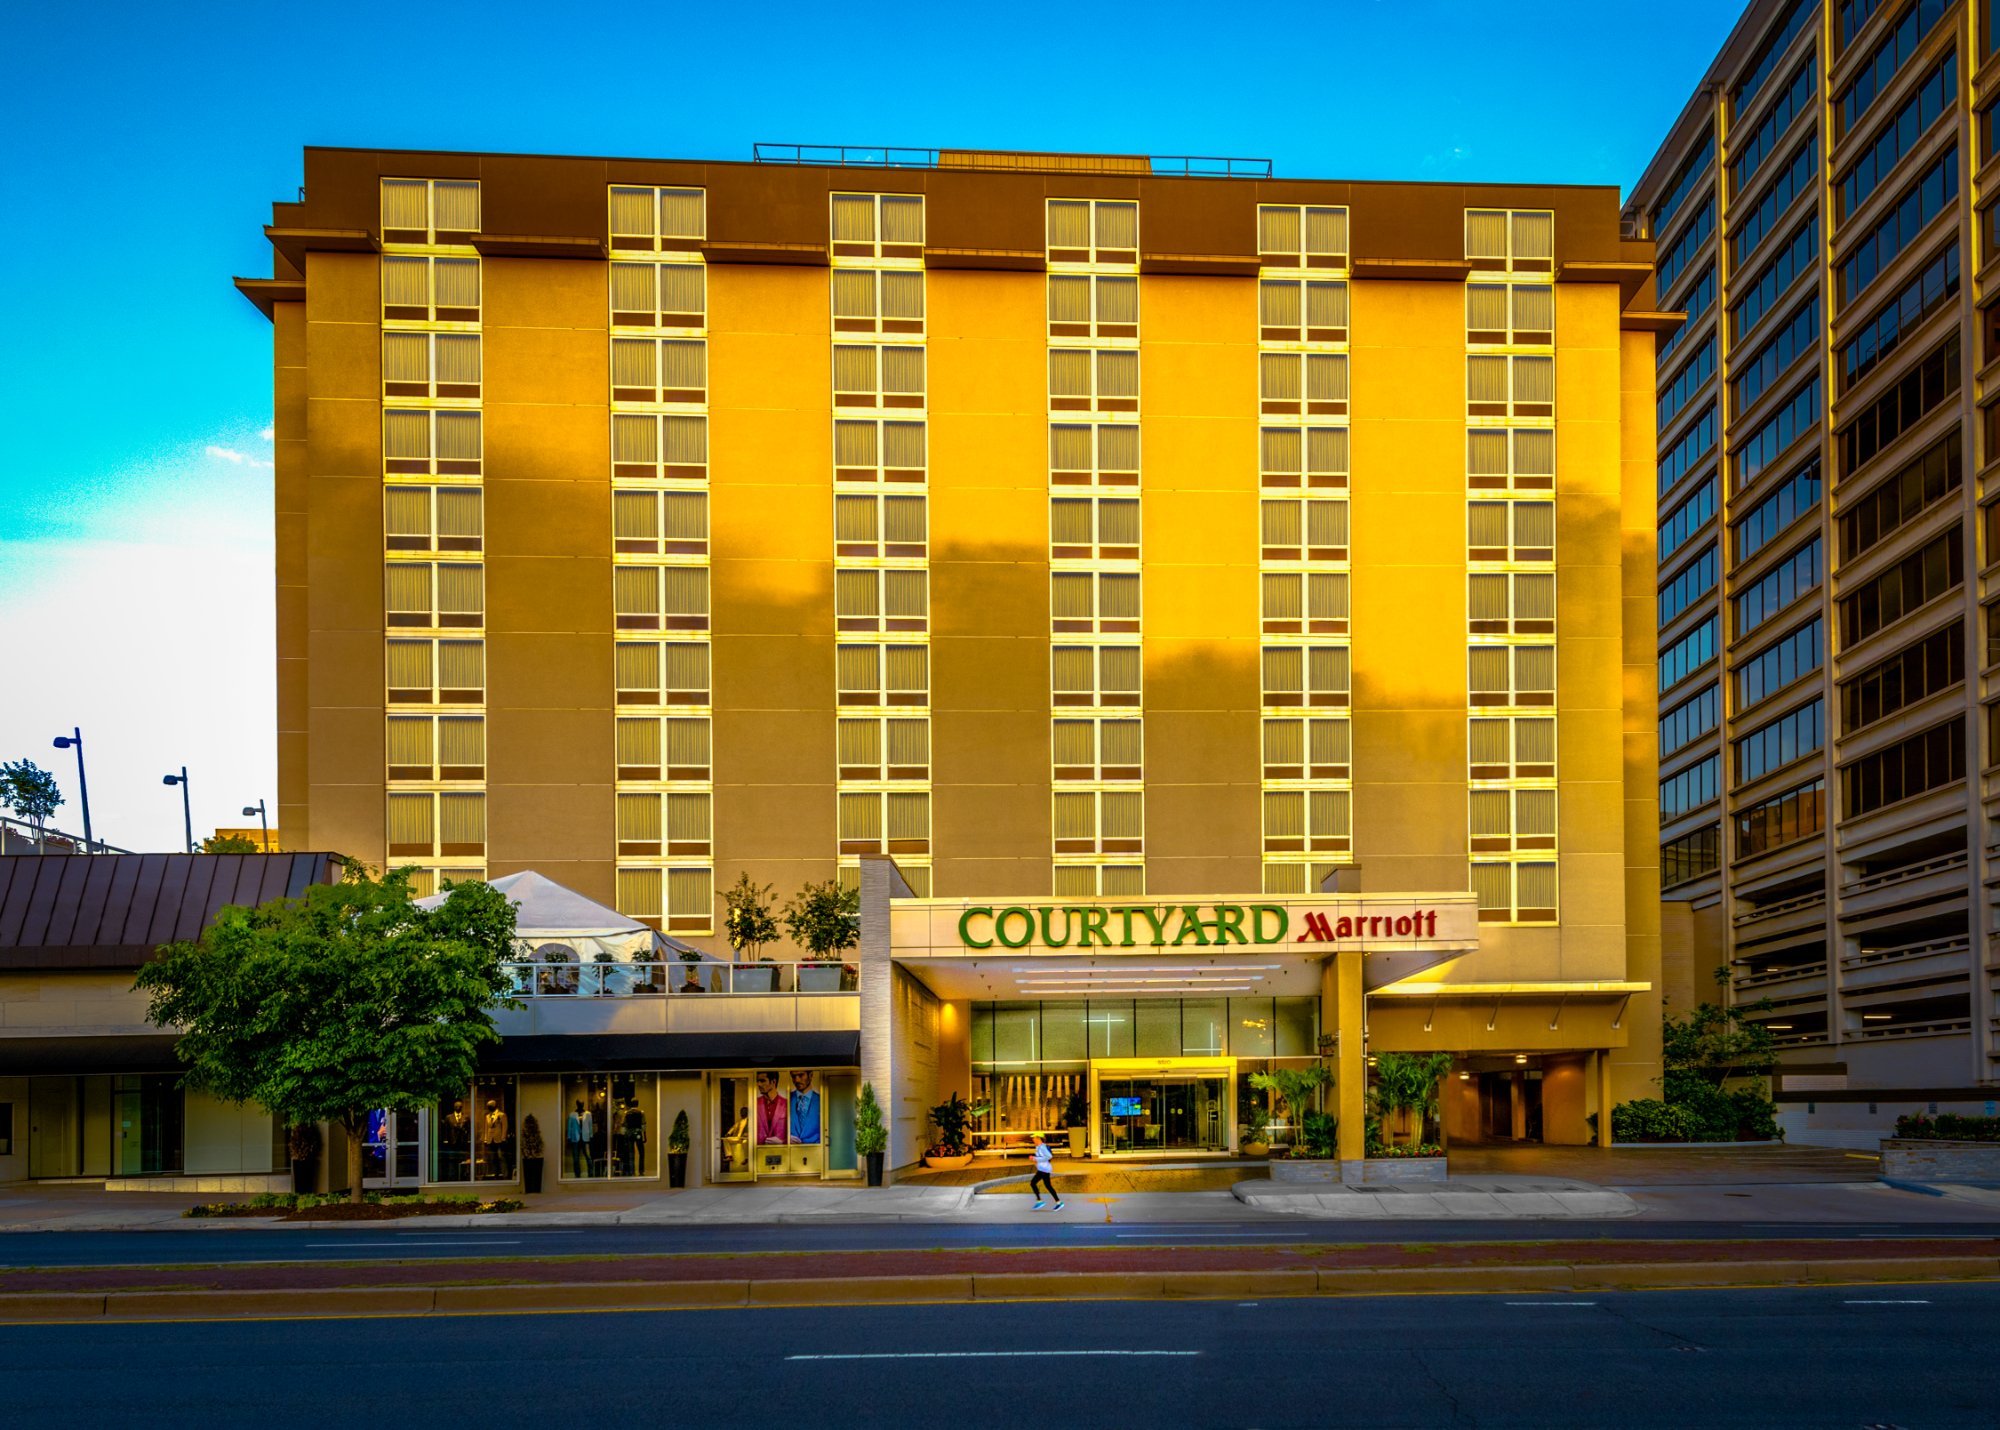 Photo of Courtyard Bethesda Chevy Chase, Chevy Chase, MD